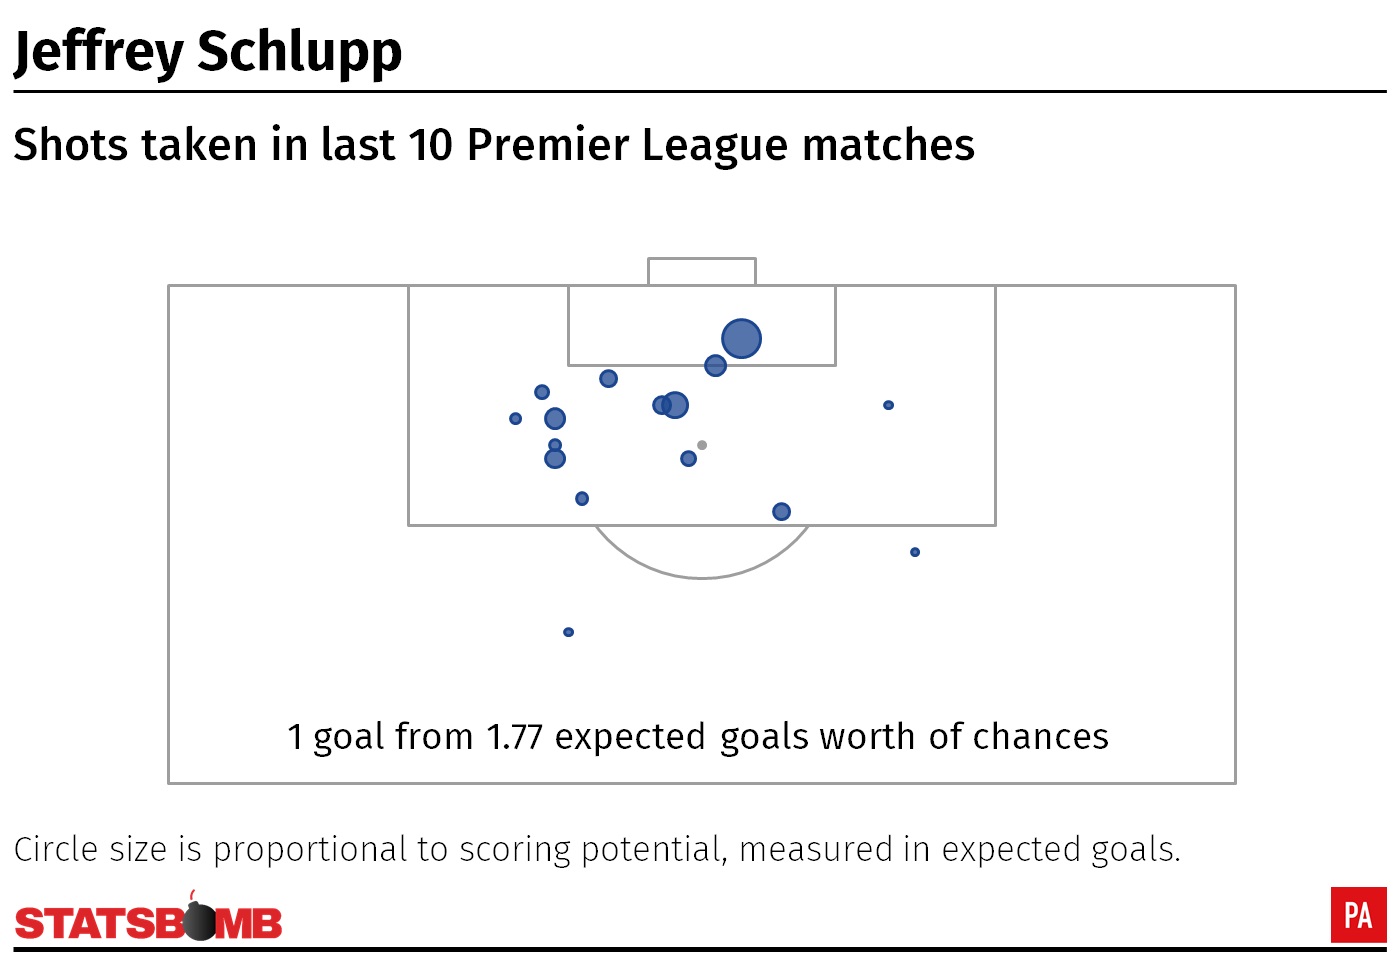 A graphic showing Jeffrey Schlupp's shot map over the past 10 Premier League games for Crystal Palace